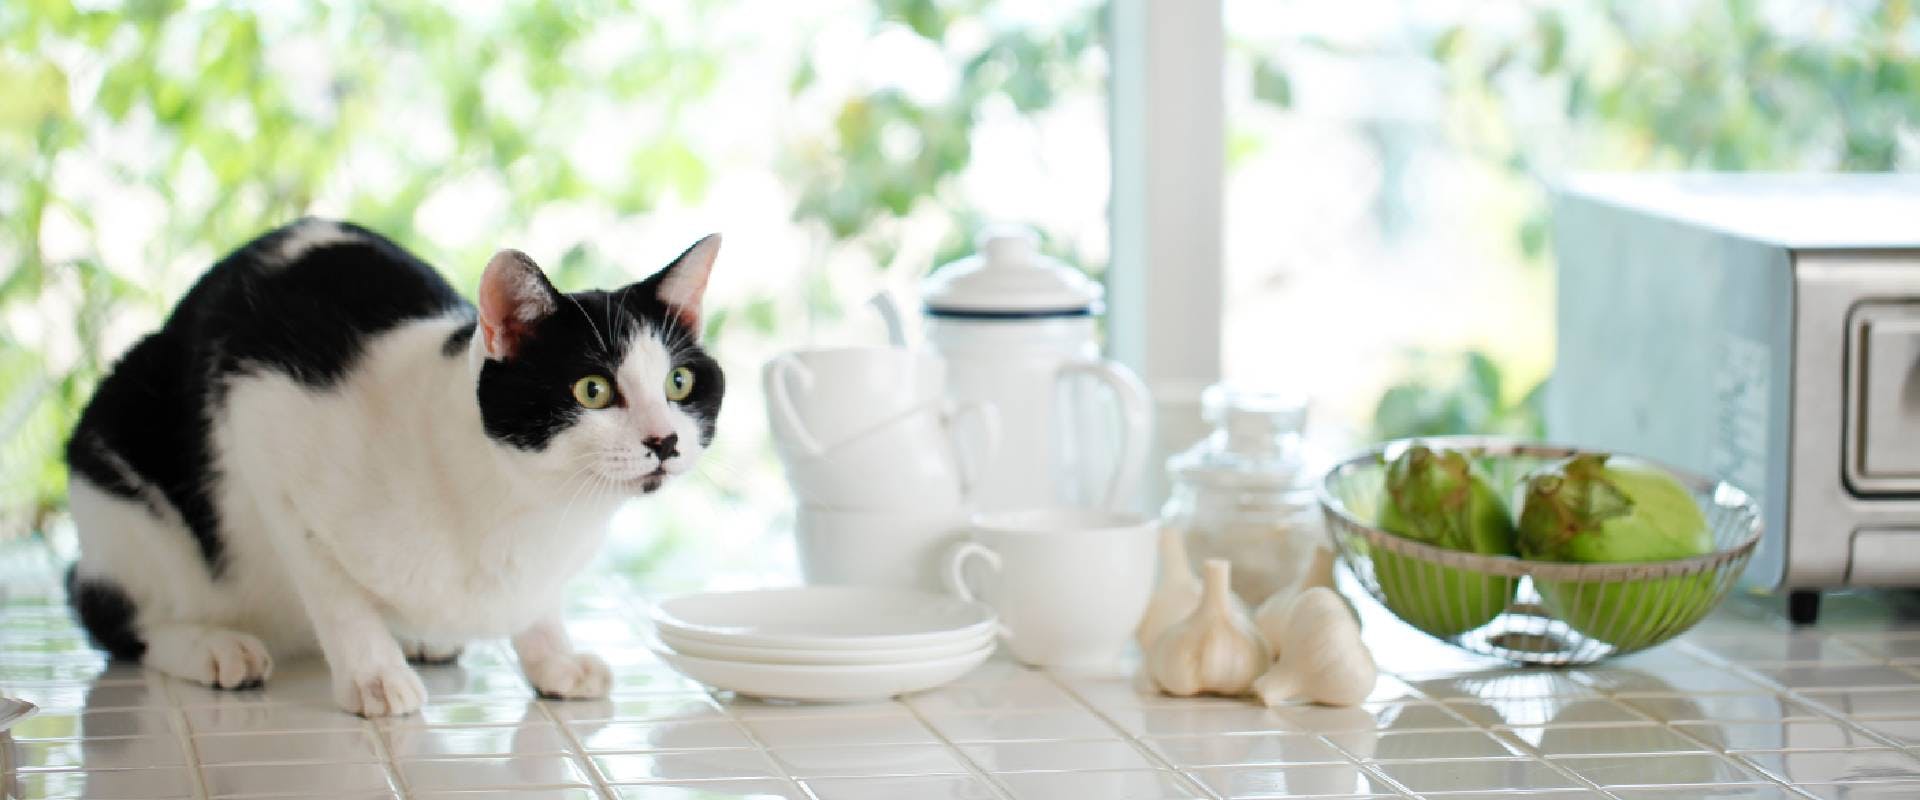 Cat on the kitchen side with garlic and fruit